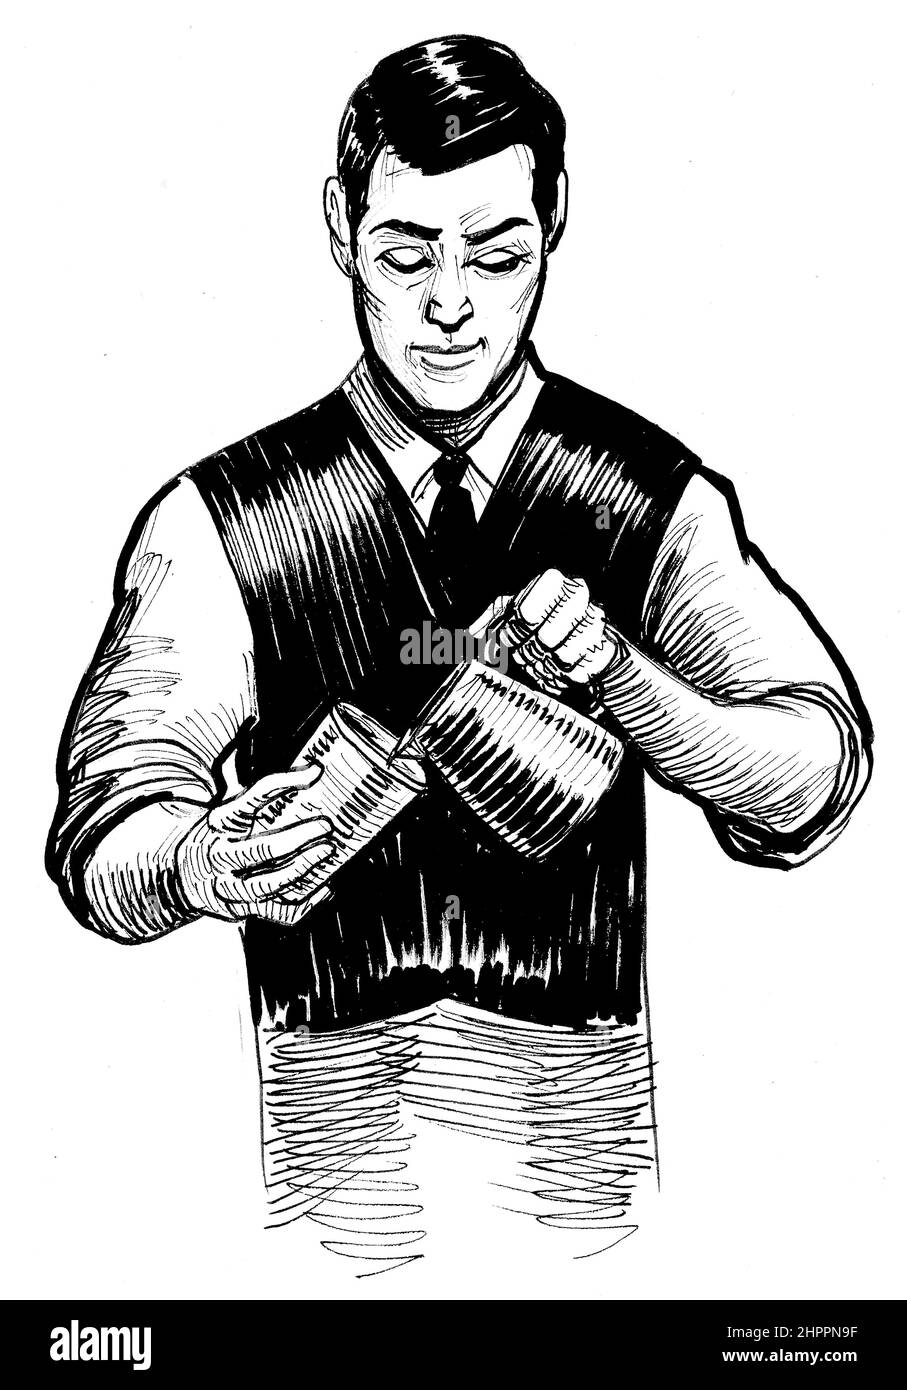 Barista making coffee. Ink black and white drawing Stock Photo